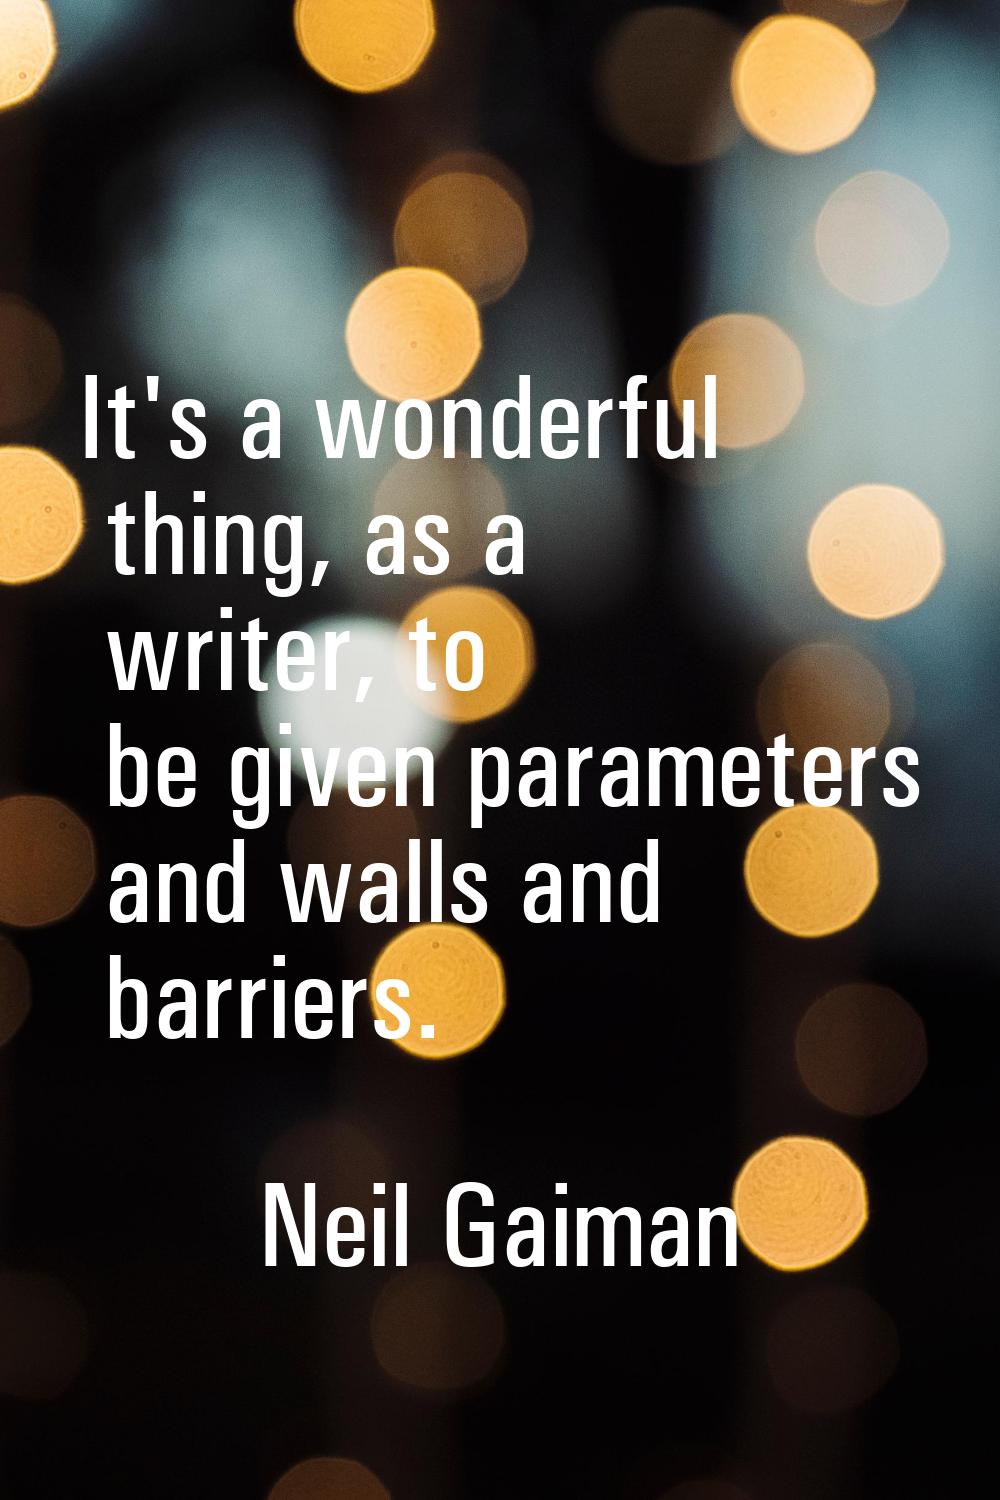 It's a wonderful thing, as a writer, to be given parameters and walls and barriers.